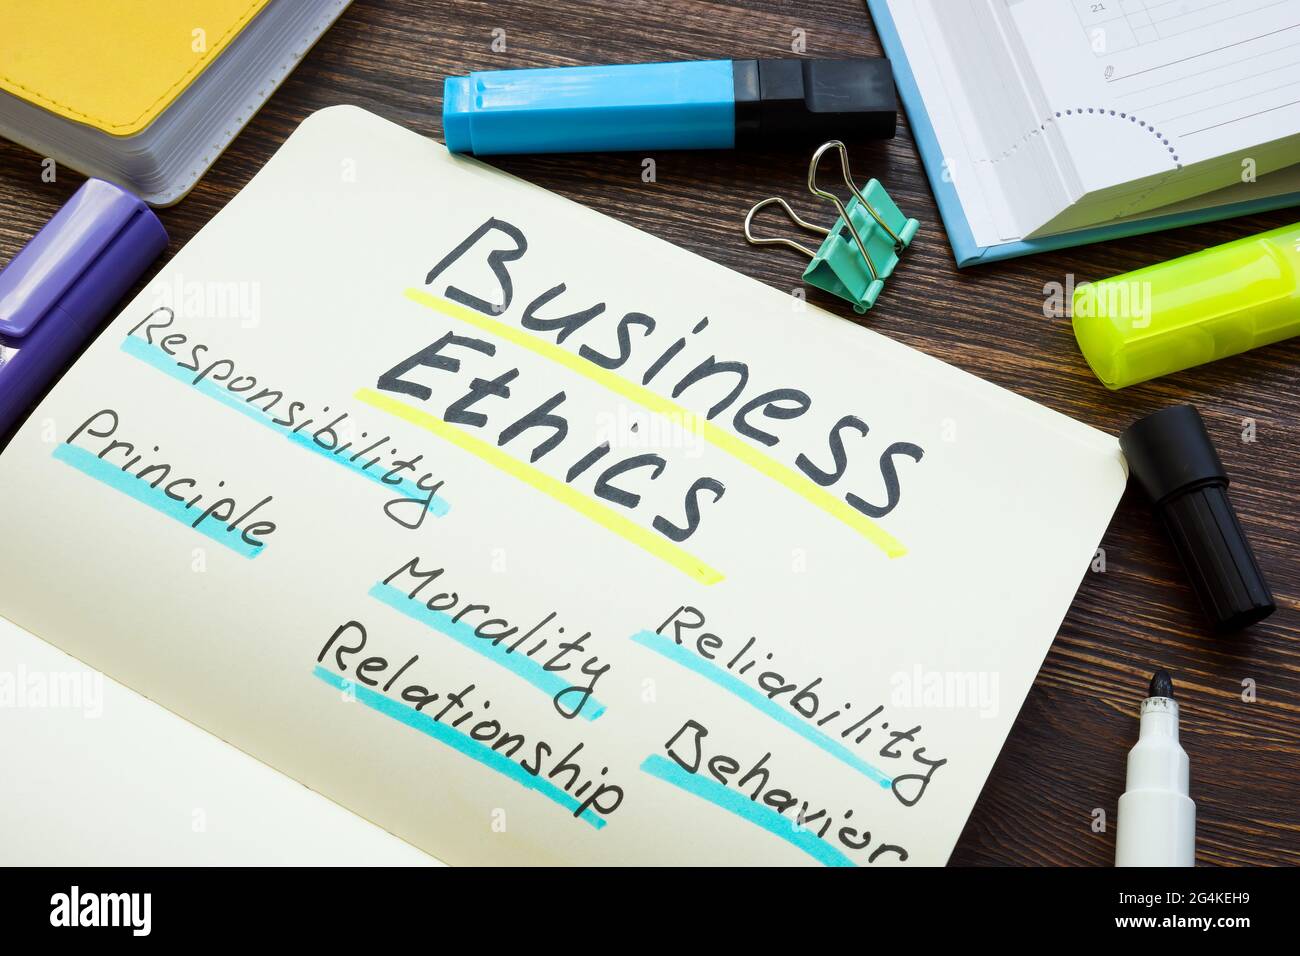 Business ethics principles list on the page. Stock Photo